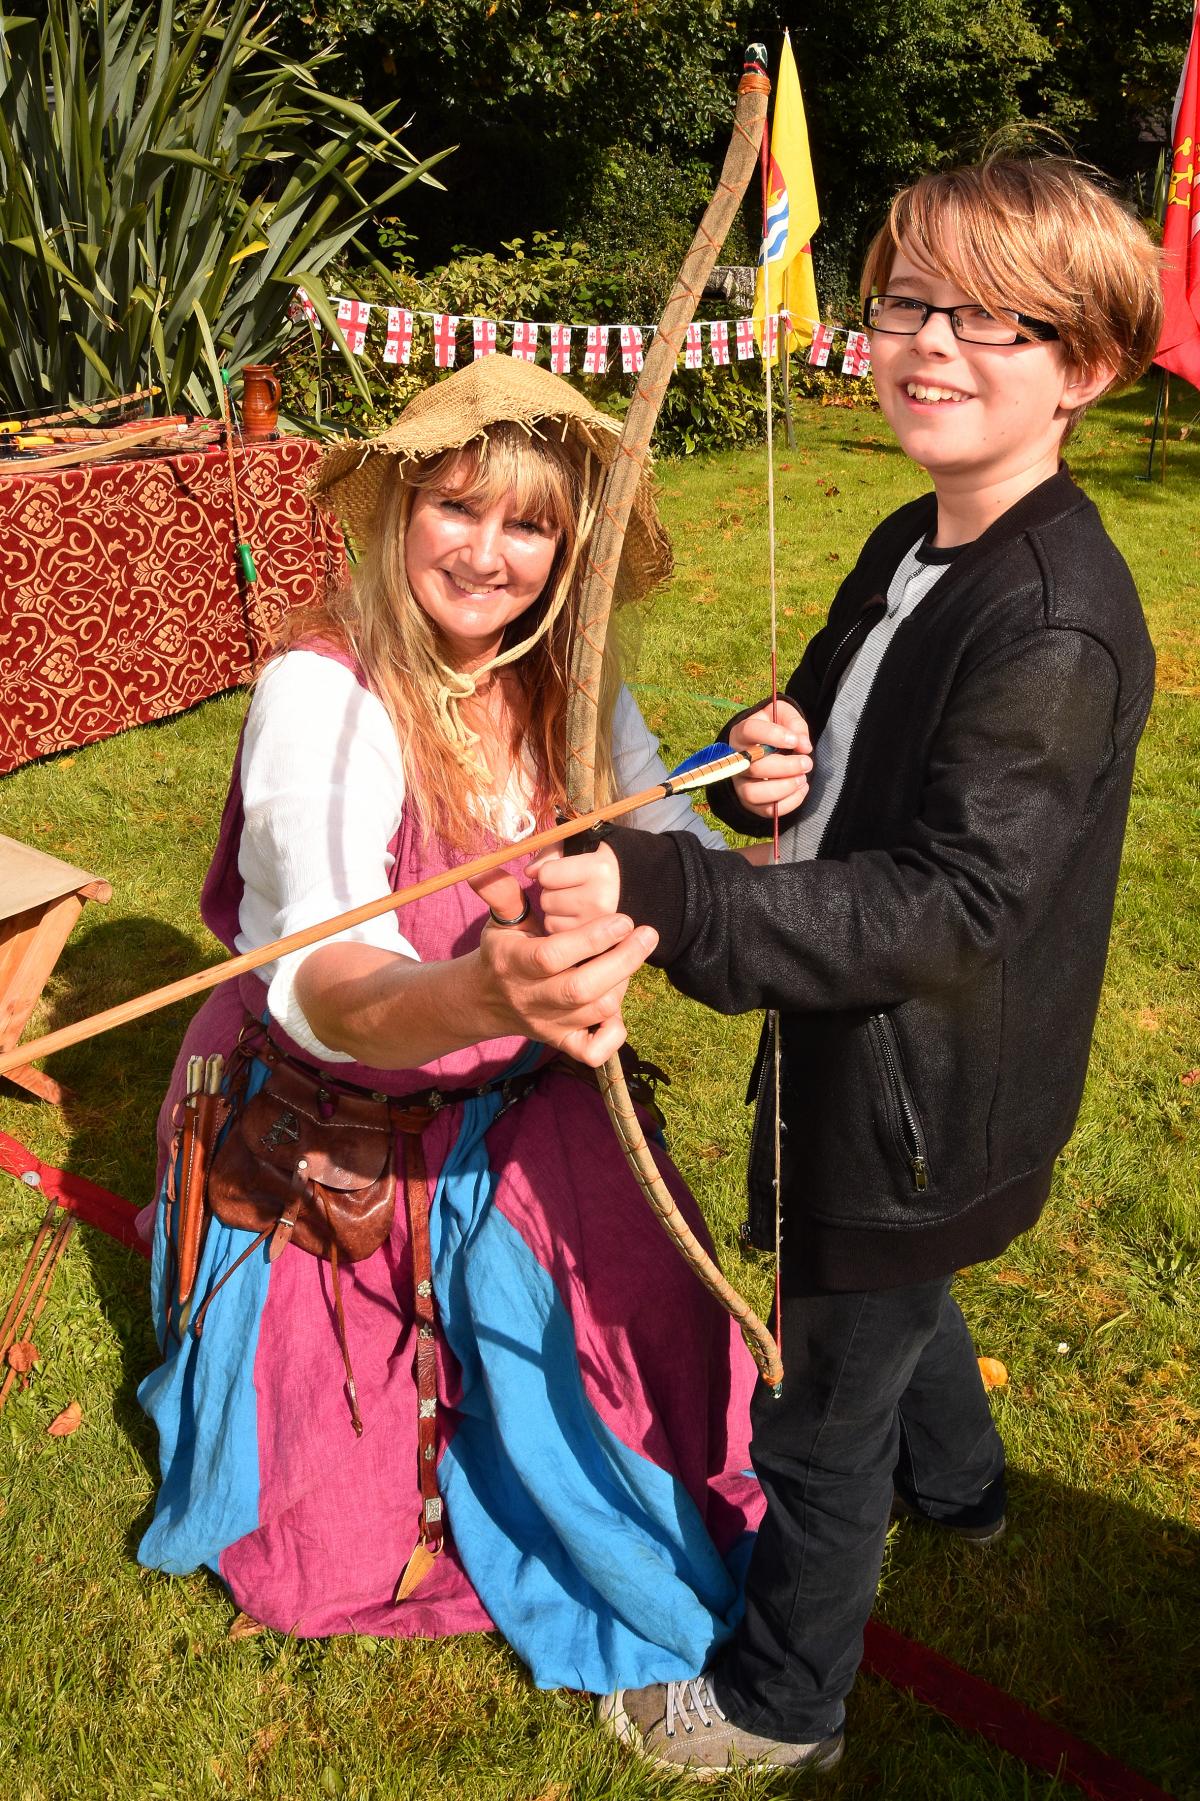 Nine year old Nathaniel gets longbow instruction with Pam Eddiford from the Bowlore medieval display group.  Pic Mark Davies